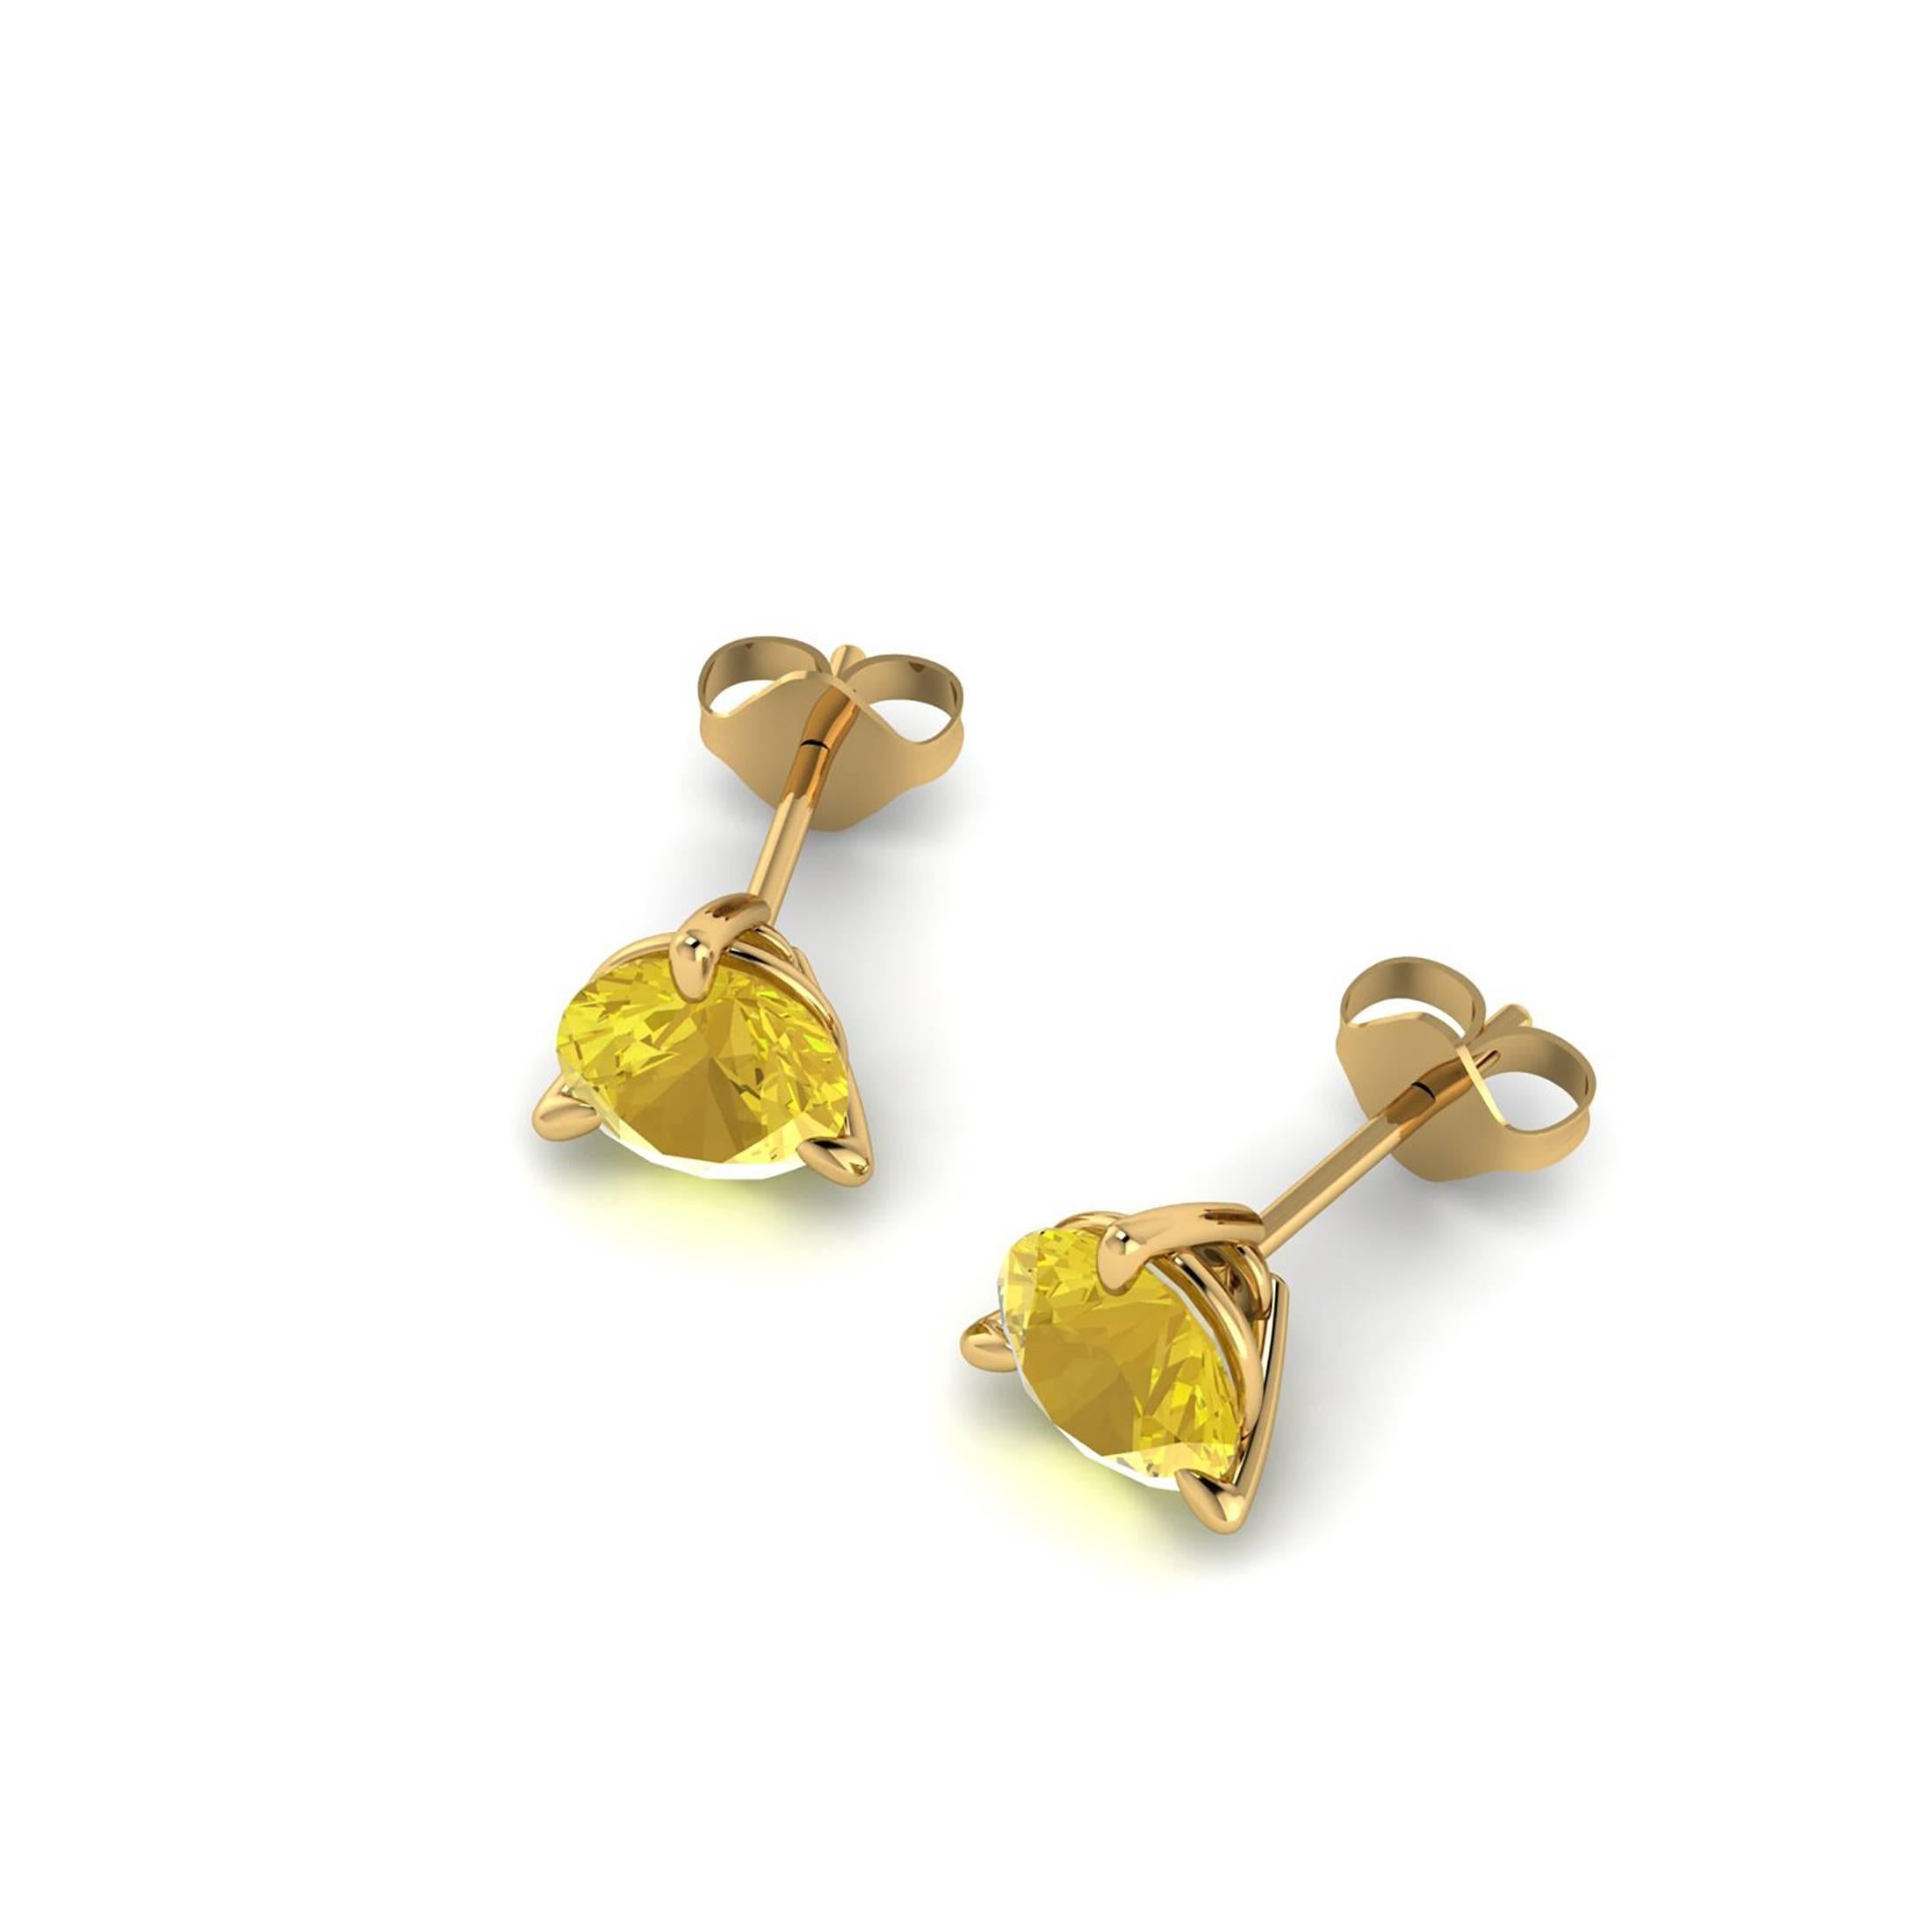 Ferrucci approximately 2.00 carats of Yellow Citrine round brilliant cut set in 18k yellow gold Martini studs , made in New York by Italian master jeweler Francesco Ferrucci.

Featuring a chic Martini style, pret-a-porter, easy to wear, ideal for